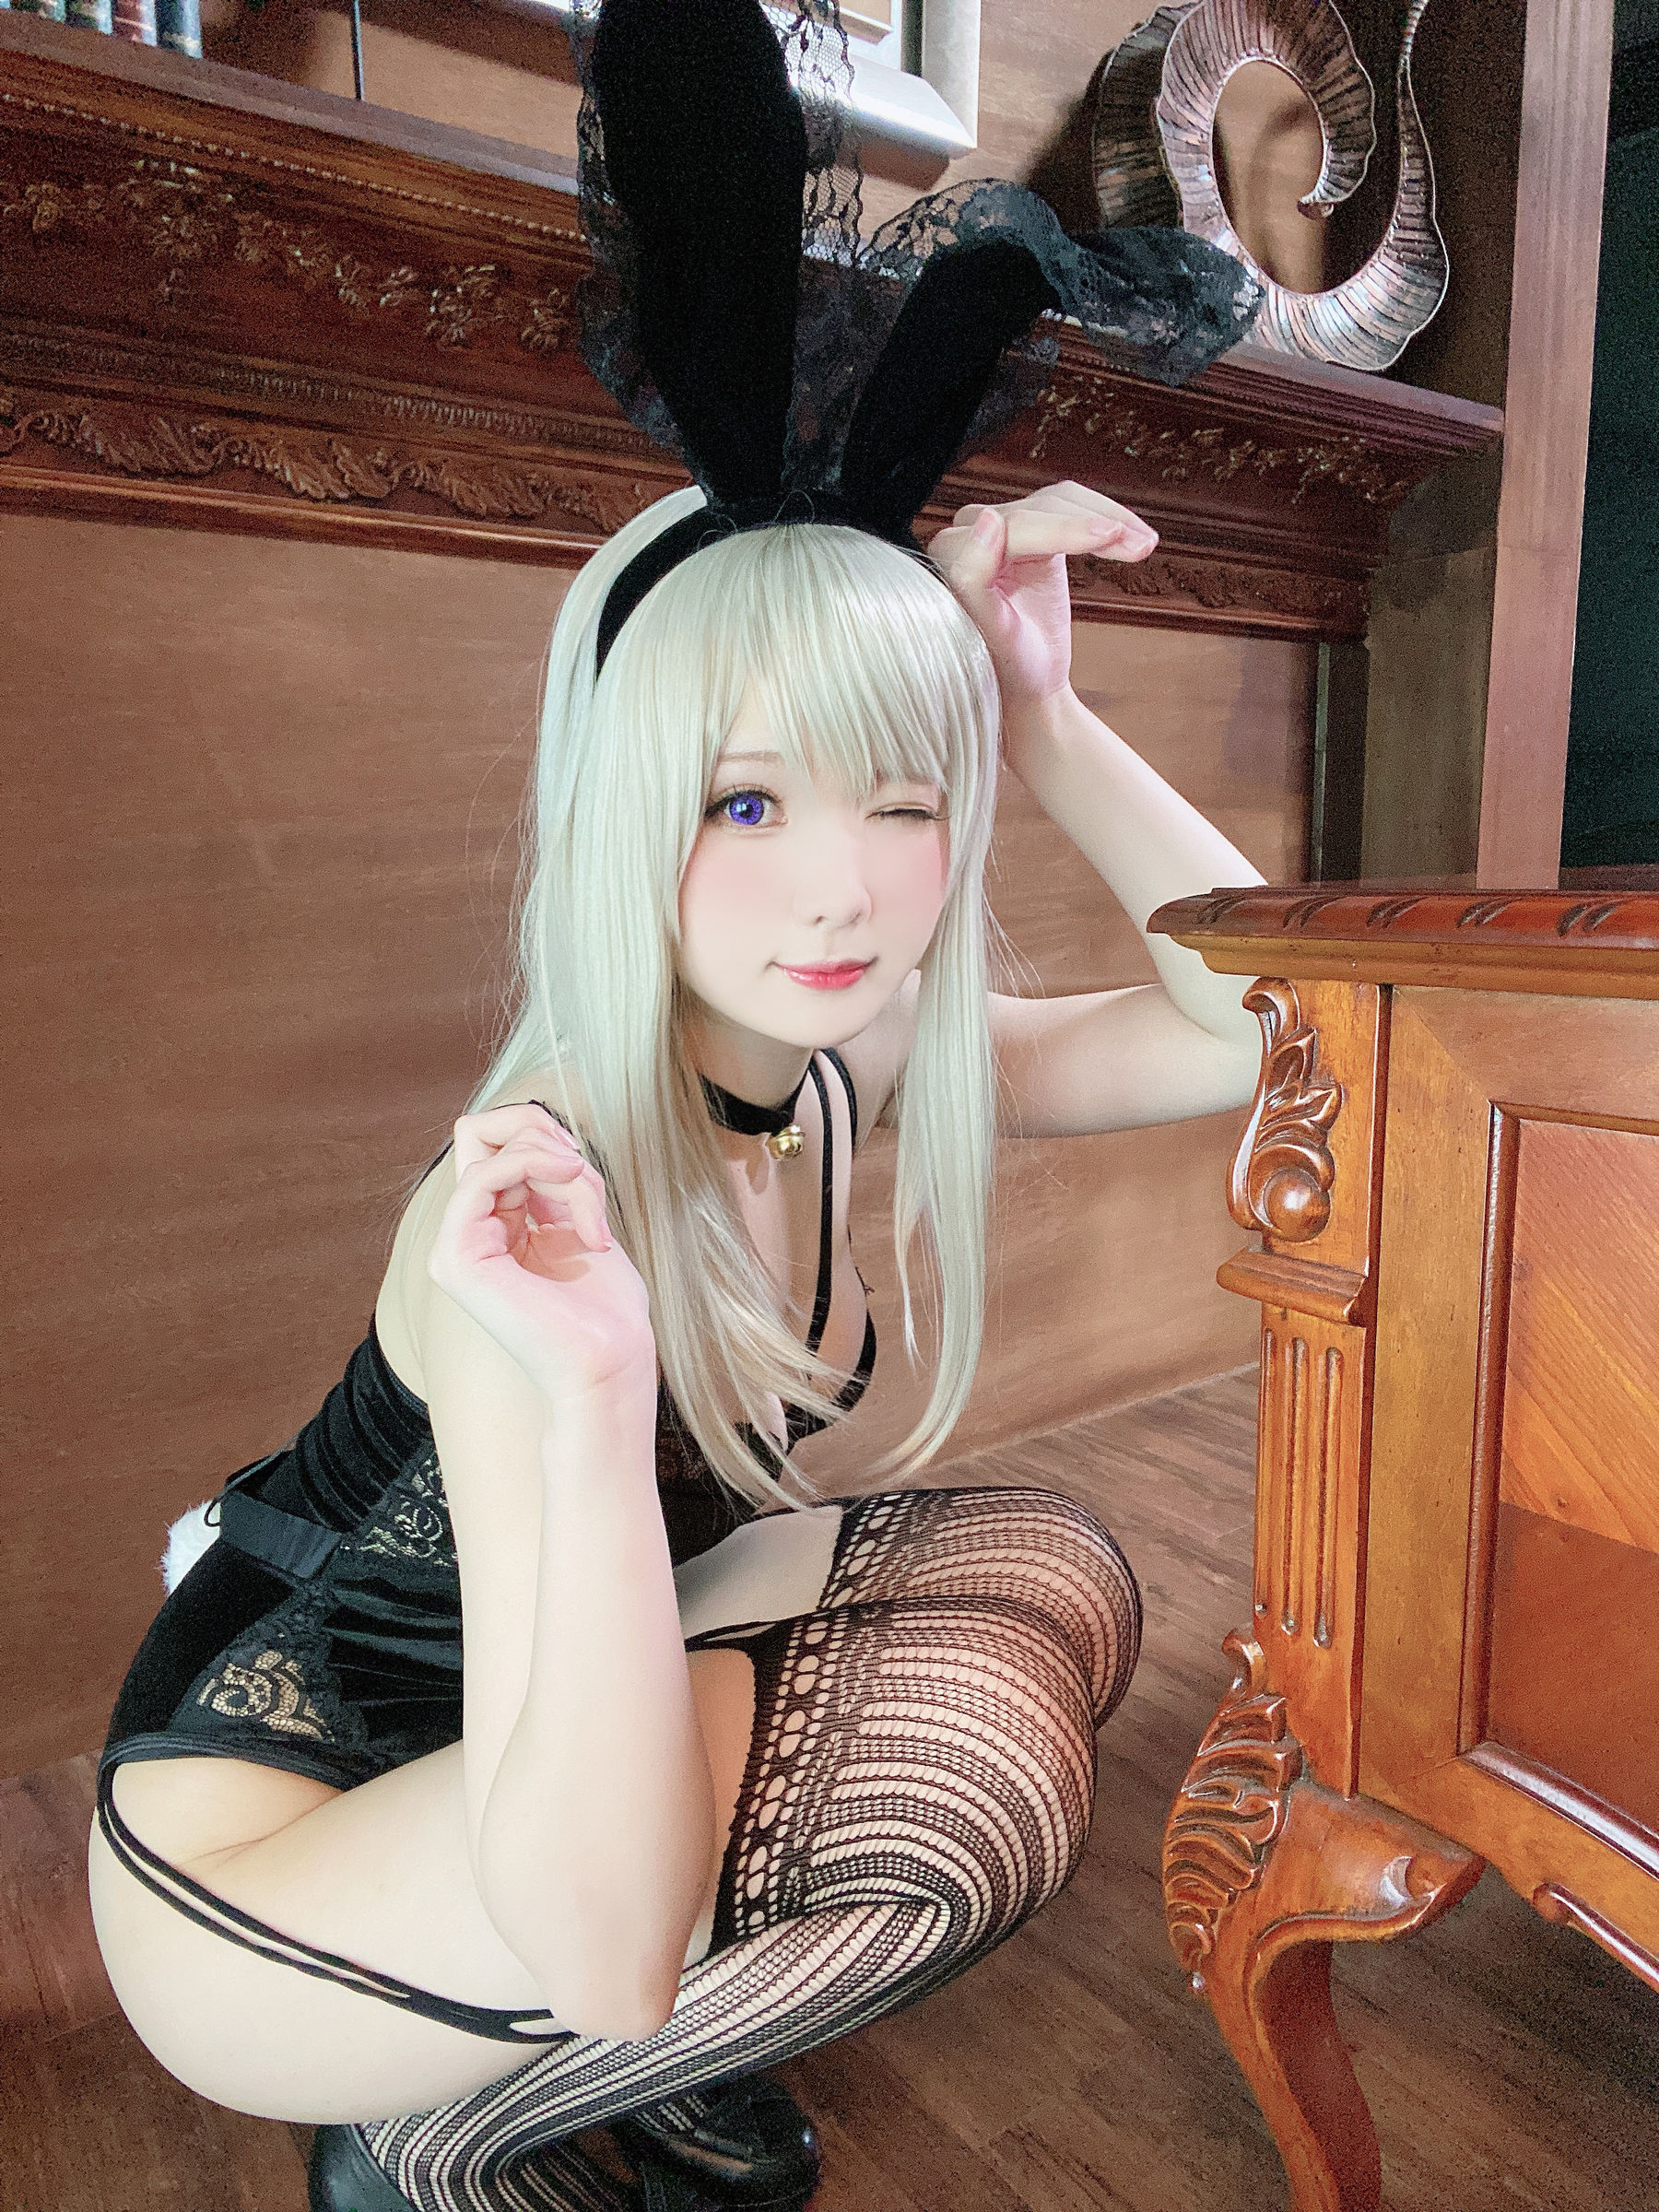 Weibo sister paper frost month Shimo – black rabbit photo set